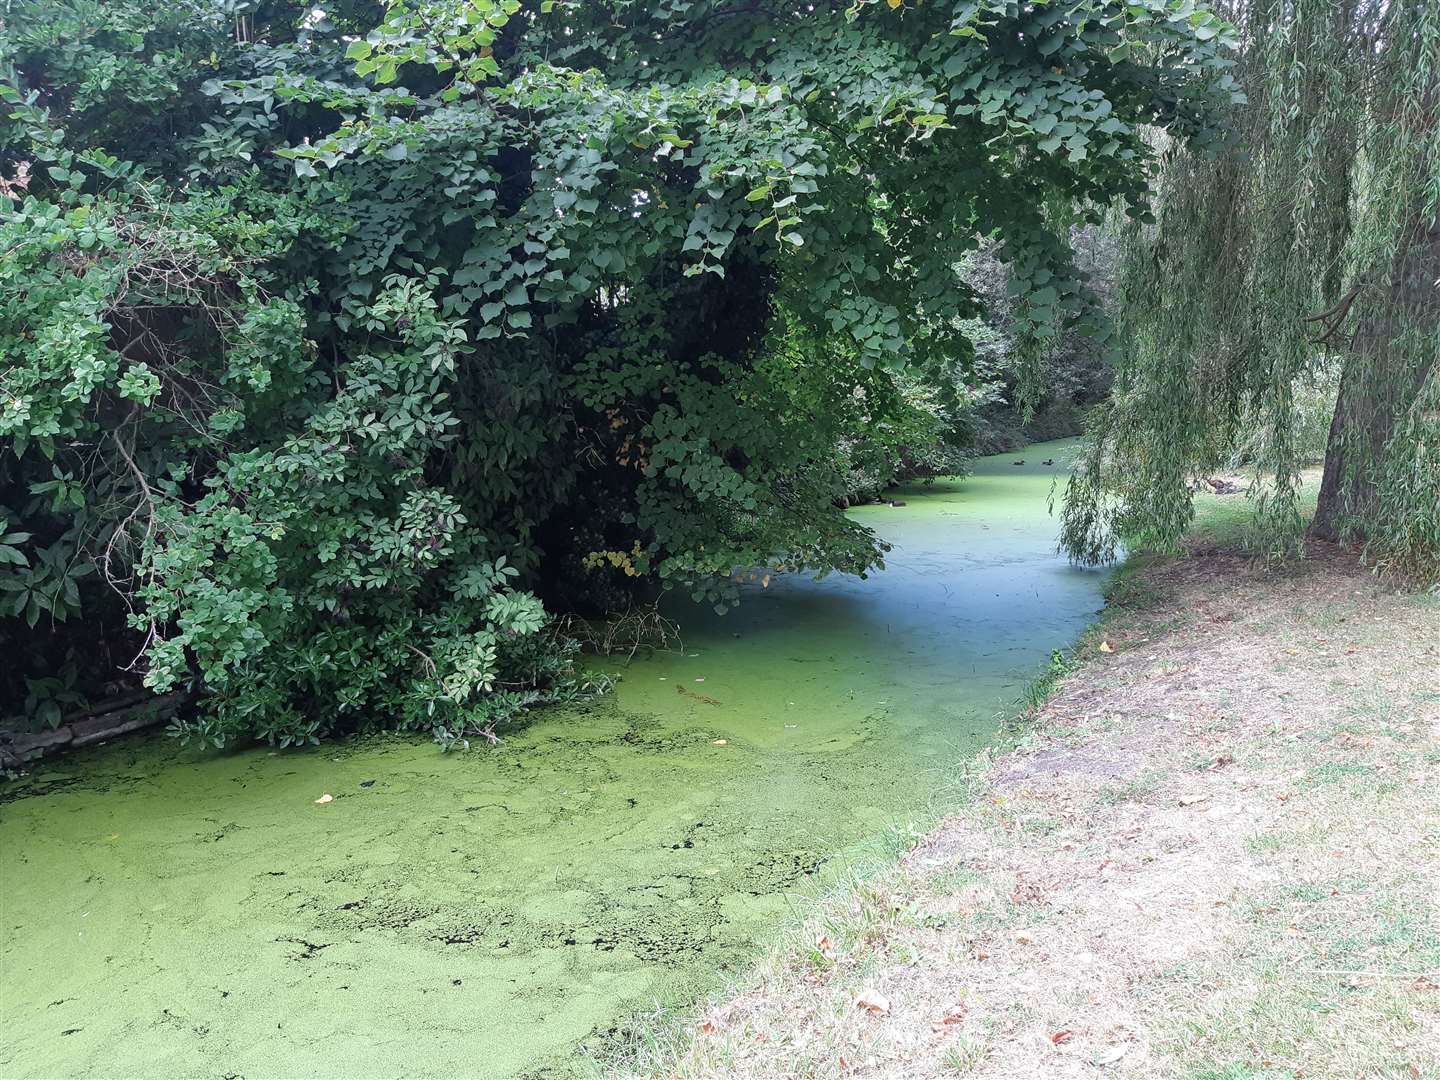 The water along the Ropewalk in Sandwich was thick with algae